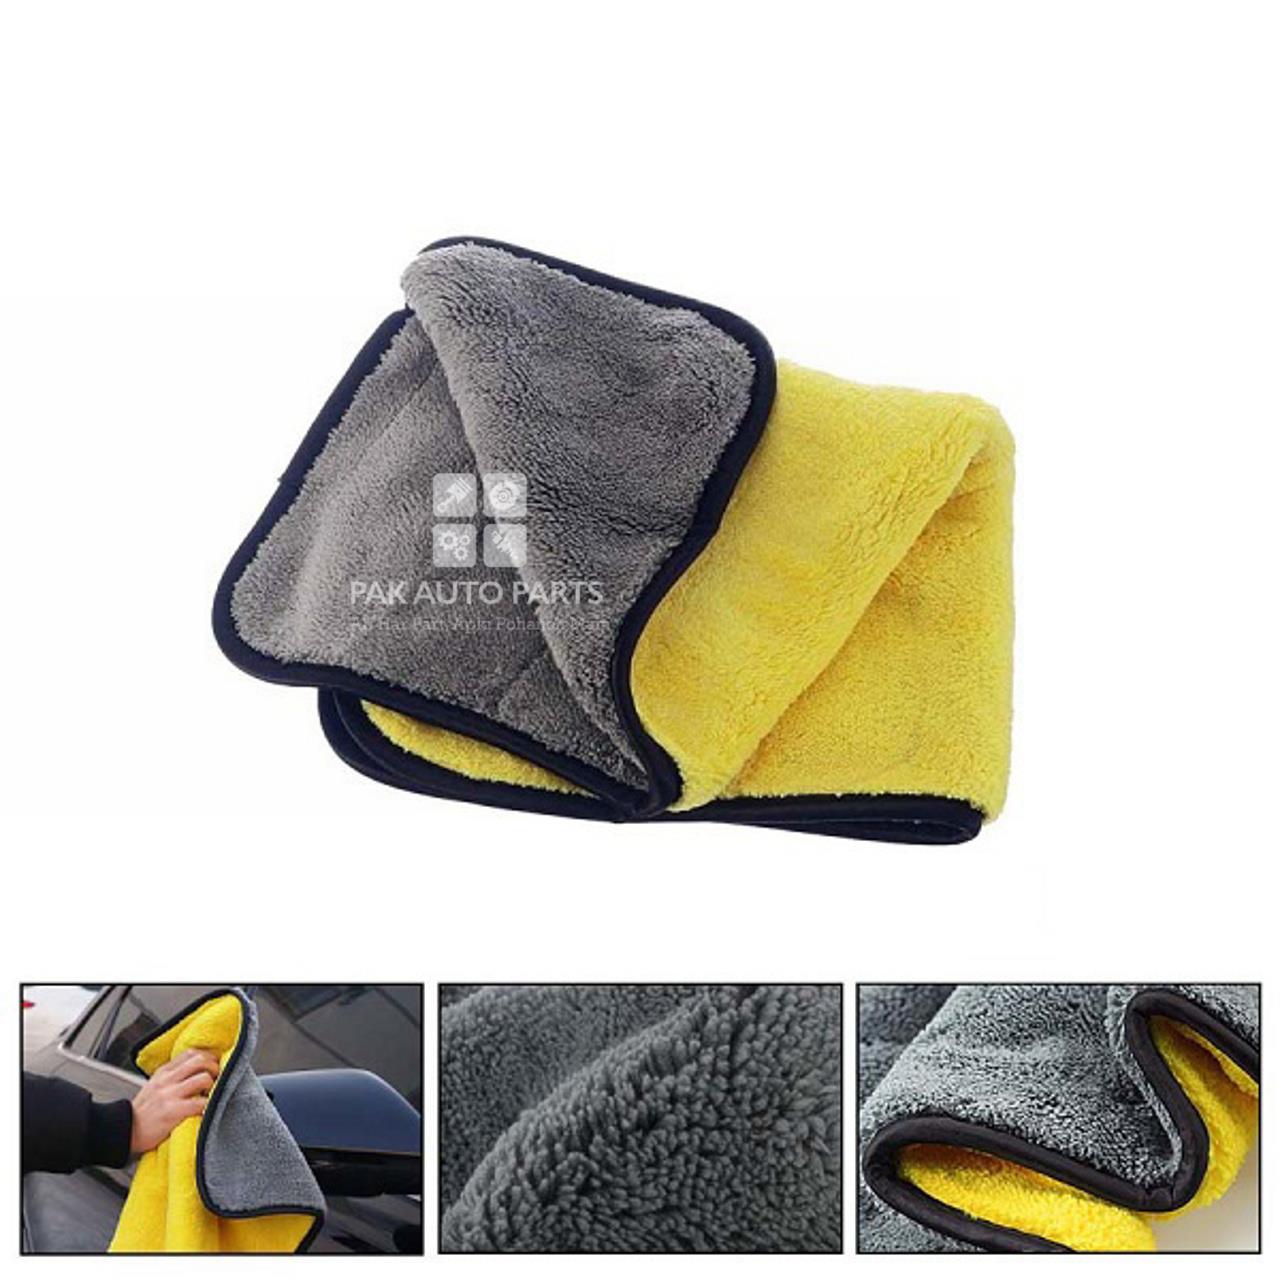 Picture of Microfiber Cleaning Cloth / Towel – Gray and Yellow Multi-Purposes.